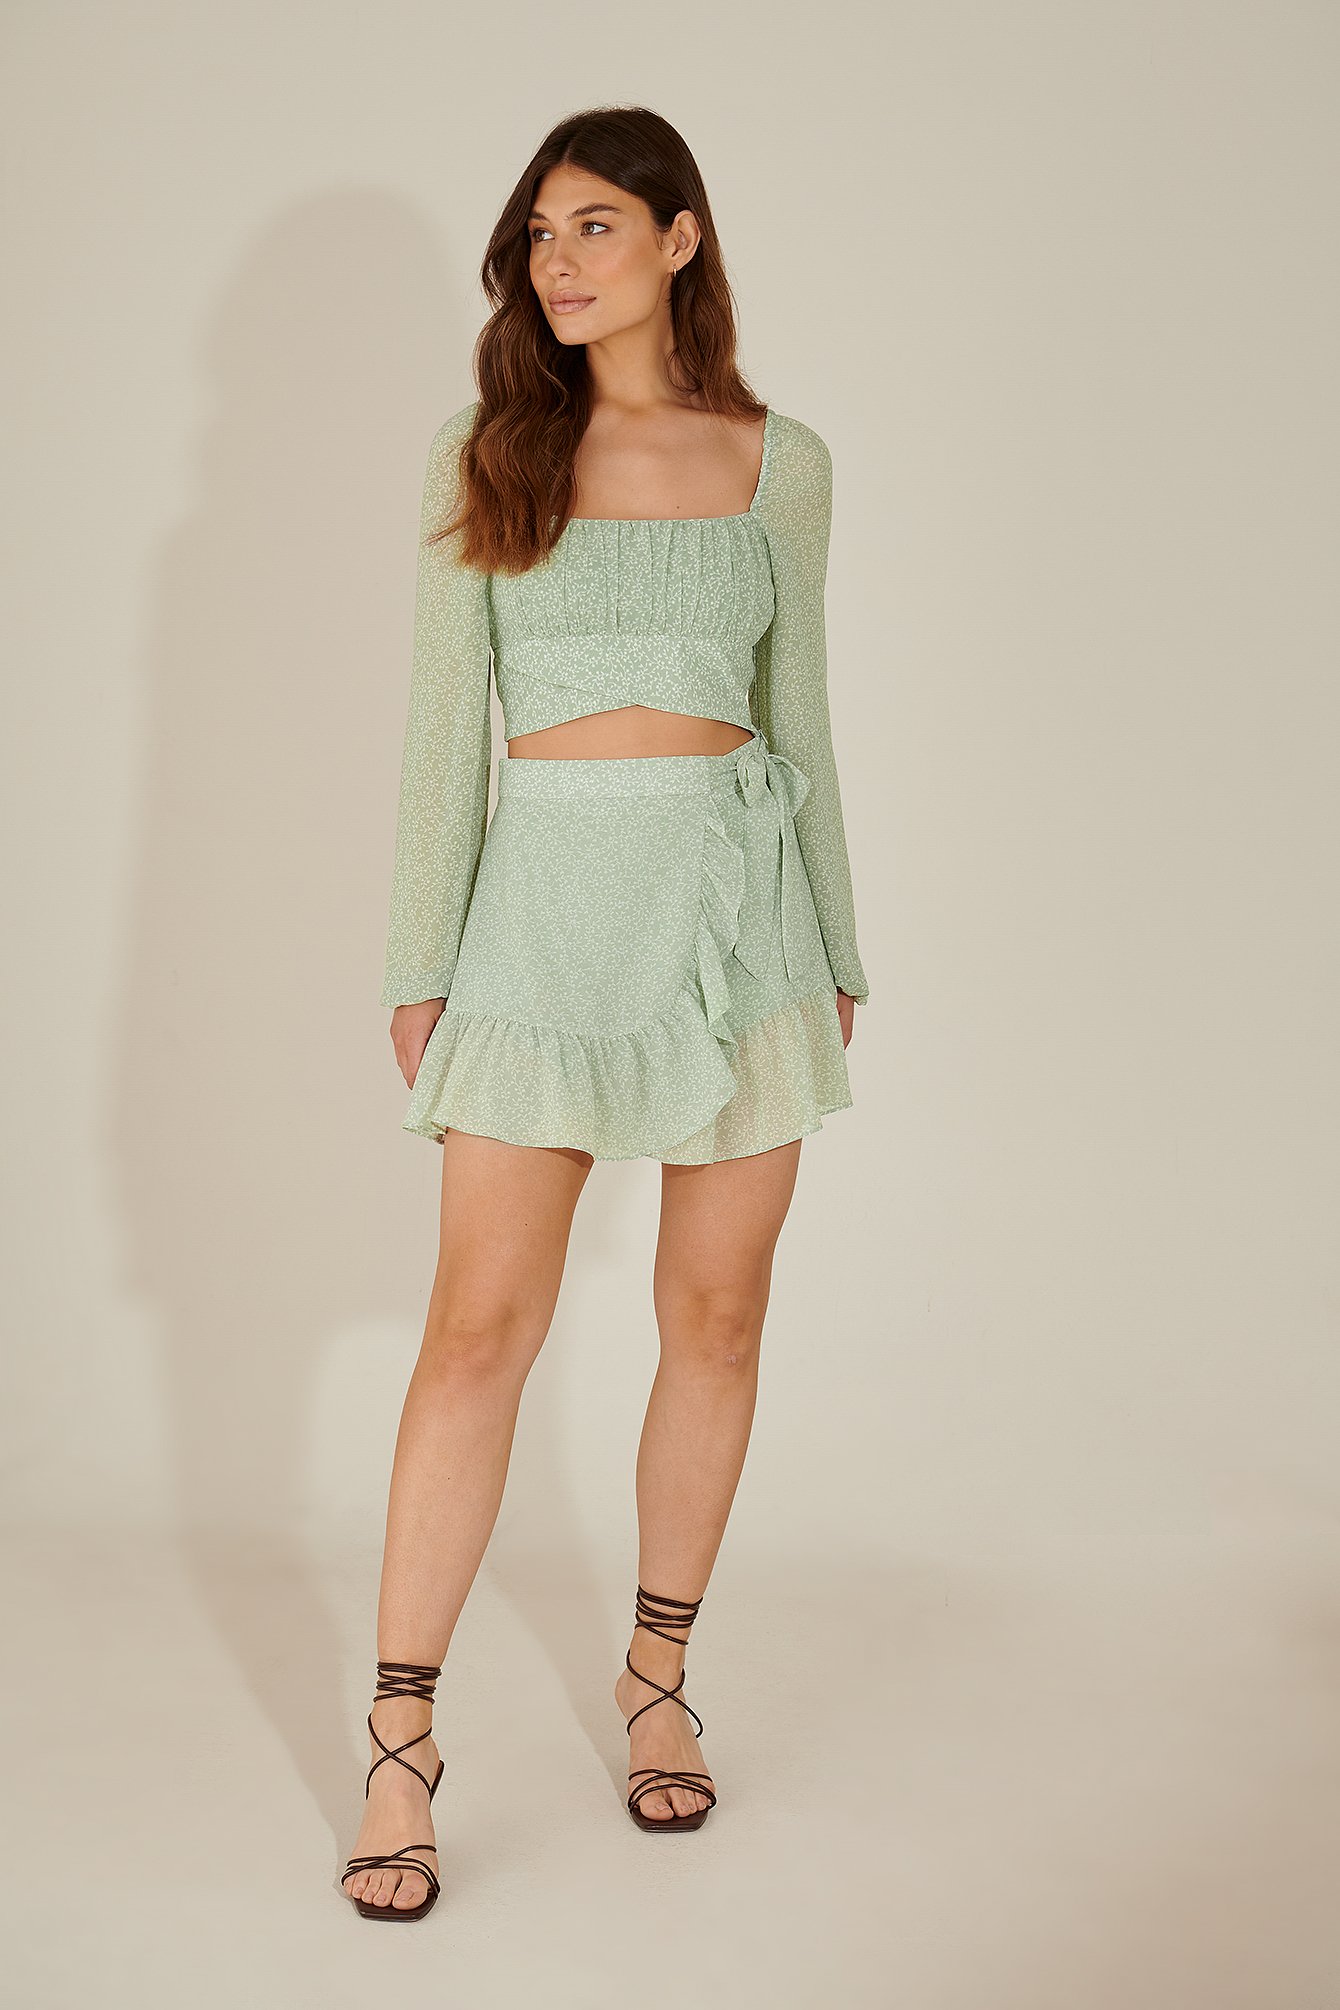 Asymmetric Recycled Frill Mini Skirt Outfit.